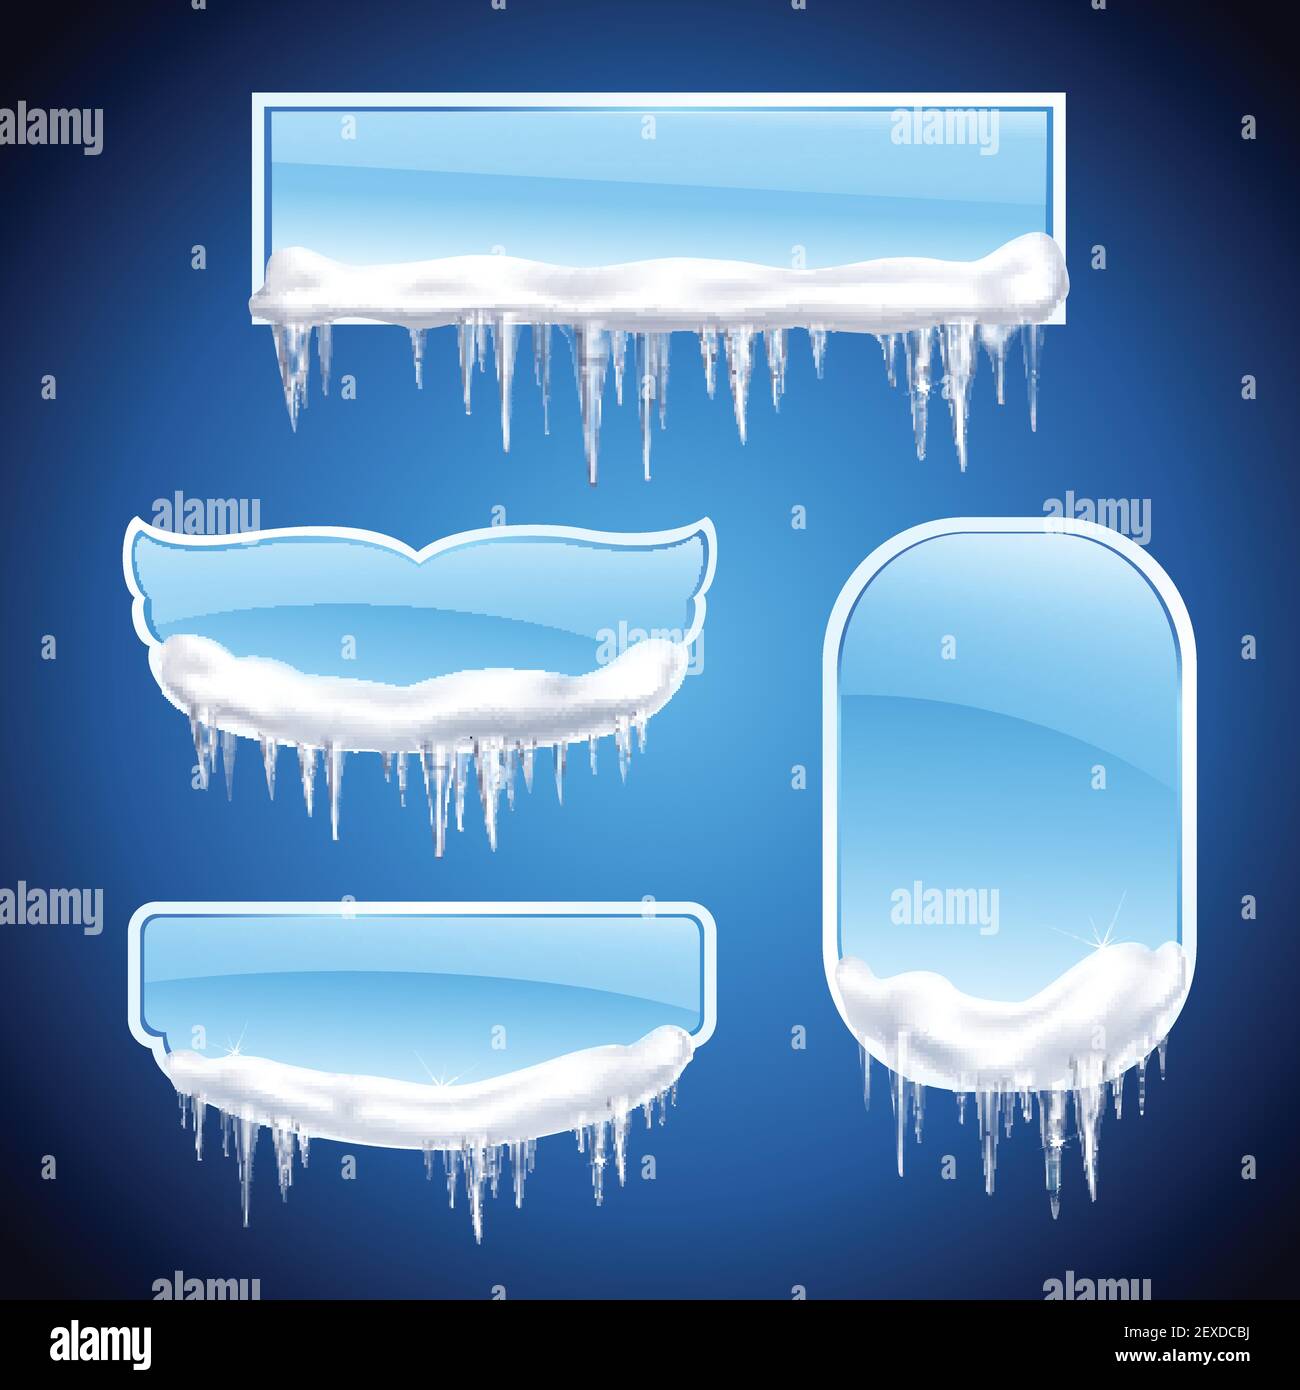 https://c8.alamy.com/comp/2EXDCBJ/isolated-icicles-frames-realistic-icon-set-with-different-shape-windows-or-frames-on-blue-background-vector-illustration-2EXDCBJ.jpg